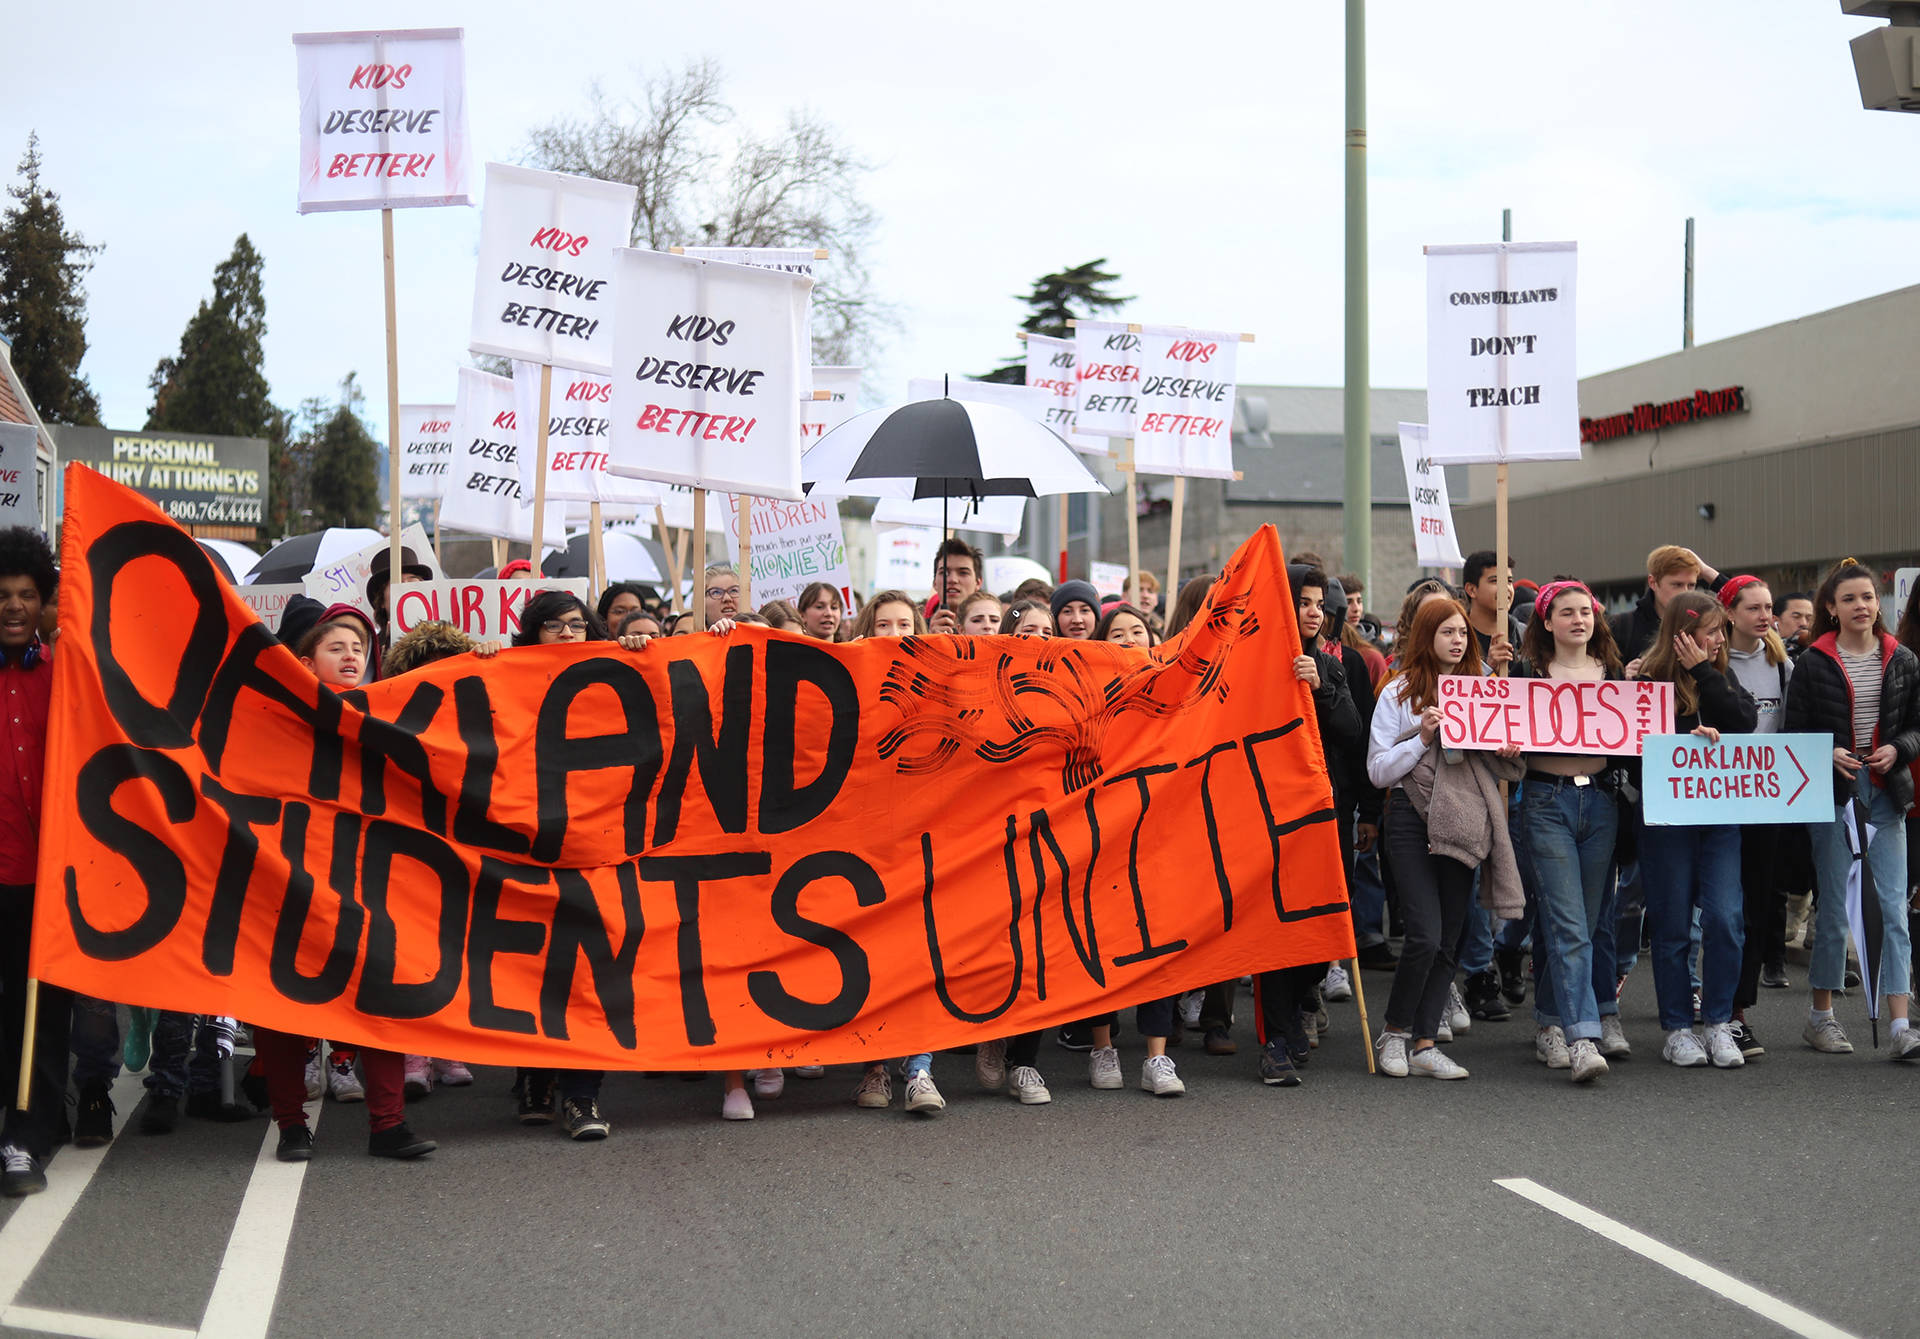 Hundreds of students from high schools across Oakland rallied in support of their teachers, marching from Oakland Tech to the Oakland Unified School District's downtown  headquarters on Feb. 8, 2019. Lindsey Moore/KQED